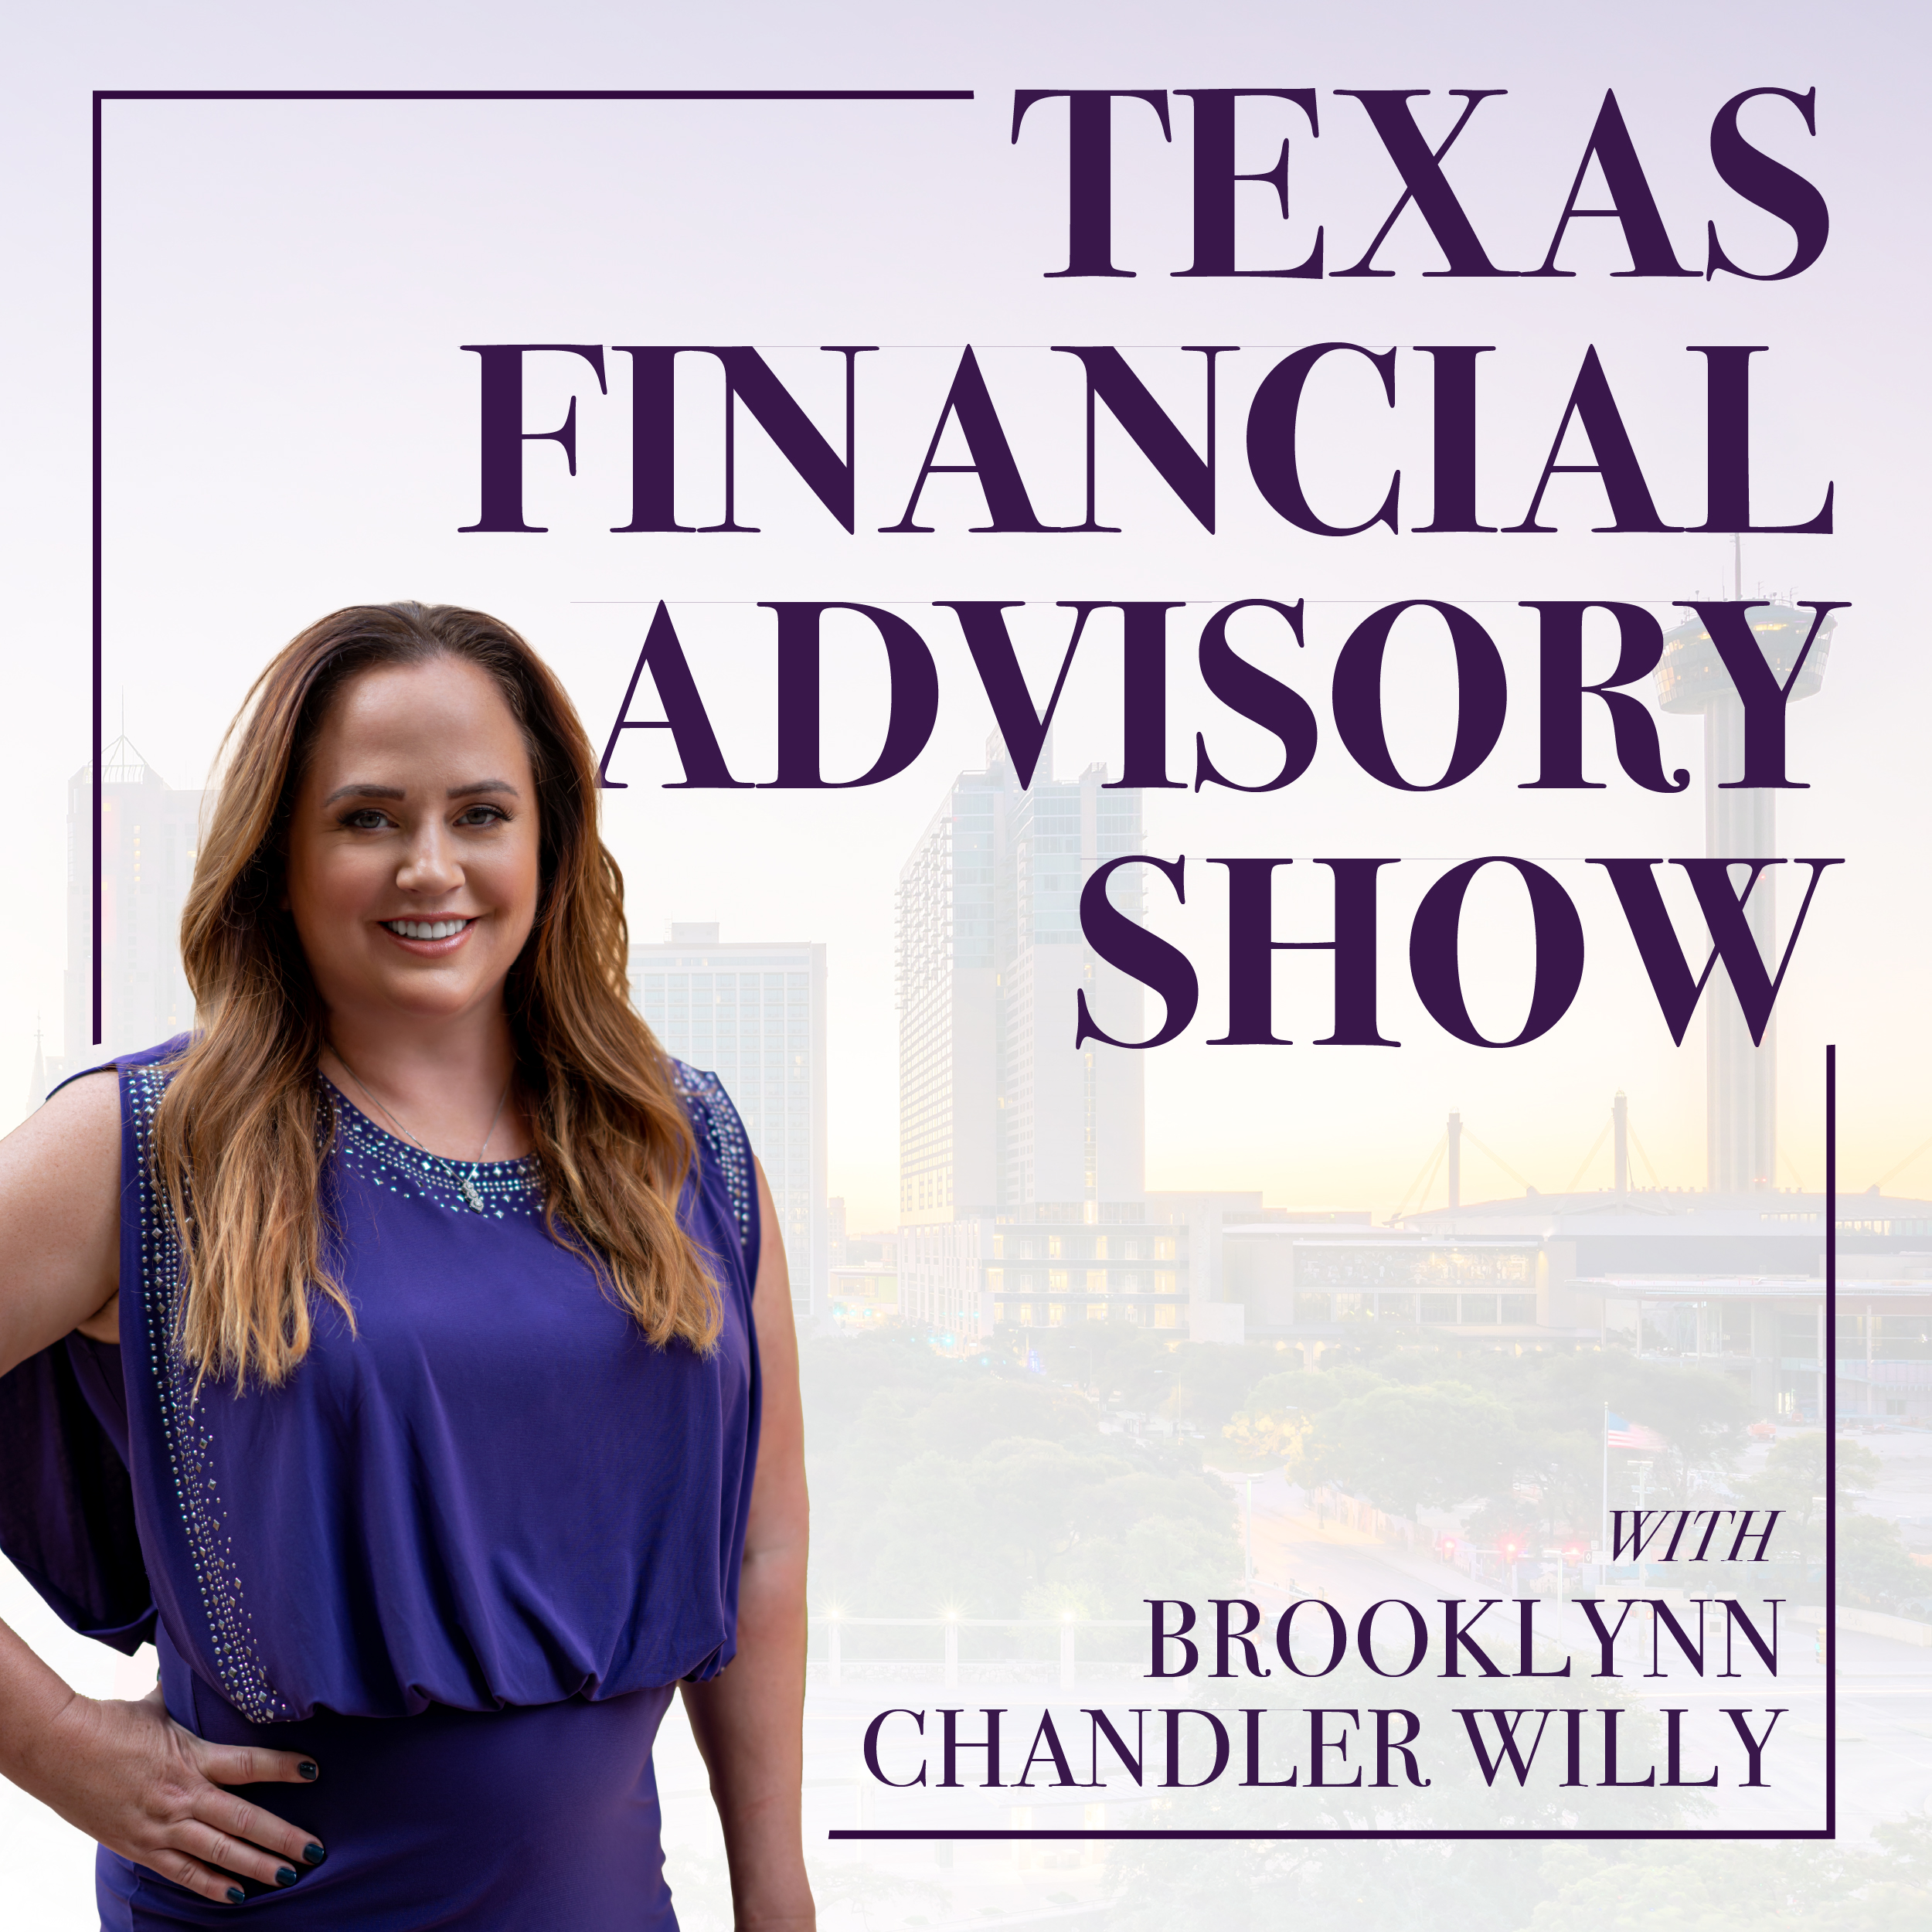 Texas Financial Advisory Group This week Brooklynn and her team discuss Retirement Income Fiduciaries vs. Registered Representatives and share some great client stories.